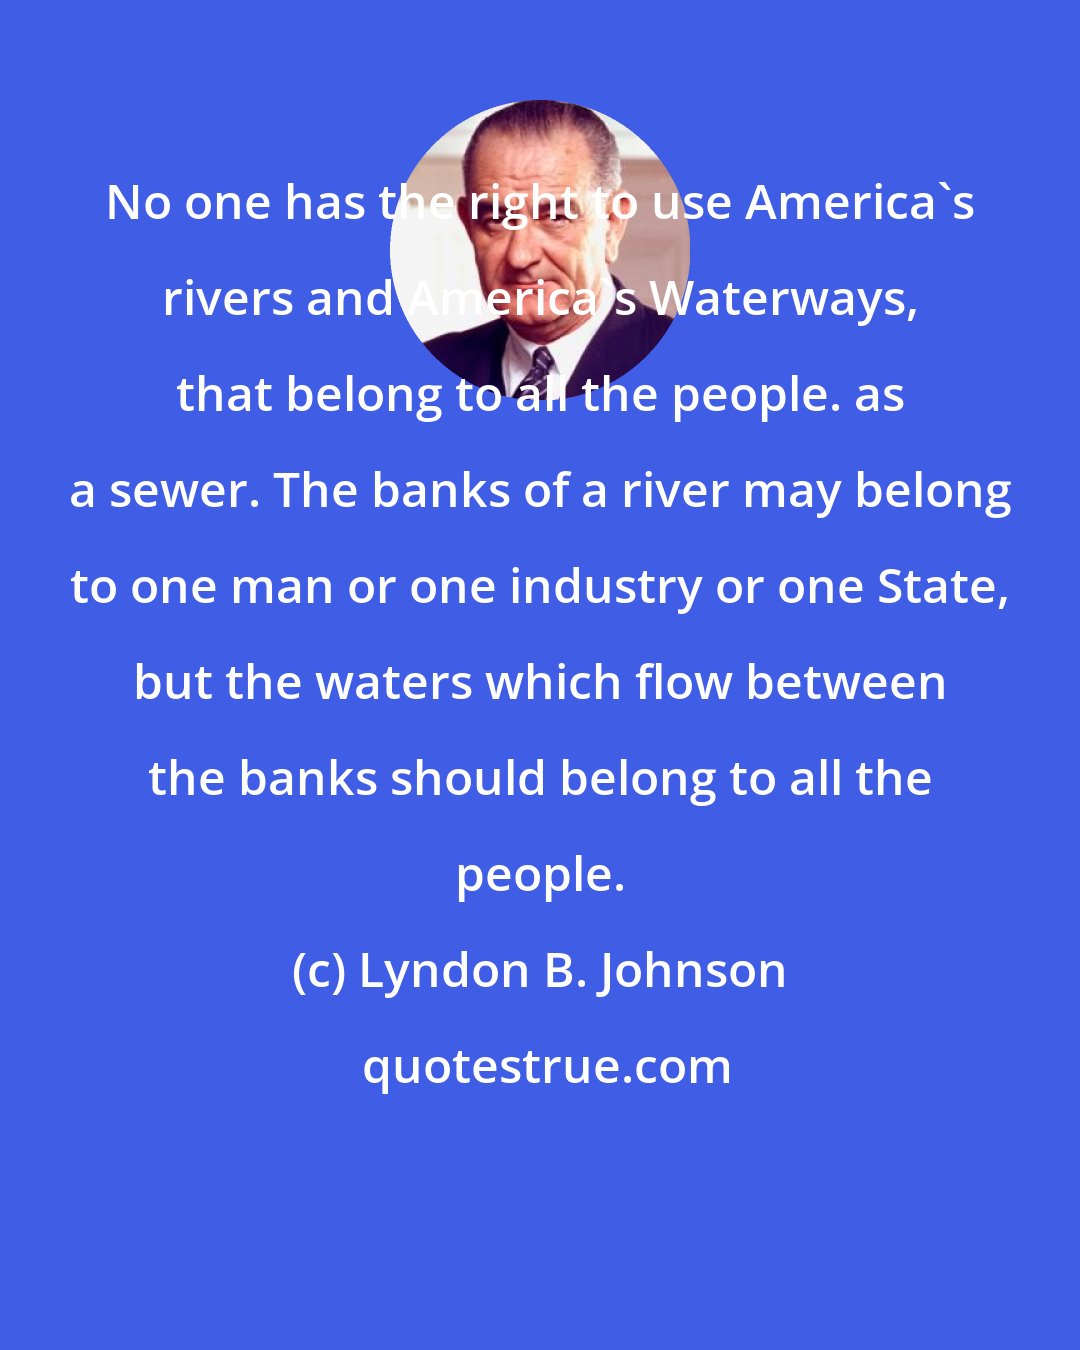 Lyndon B. Johnson: No one has the right to use America's rivers and America's Waterways, that belong to all the people. as a sewer. The banks of a river may belong to one man or one industry or one State, but the waters which flow between the banks should belong to all the people.